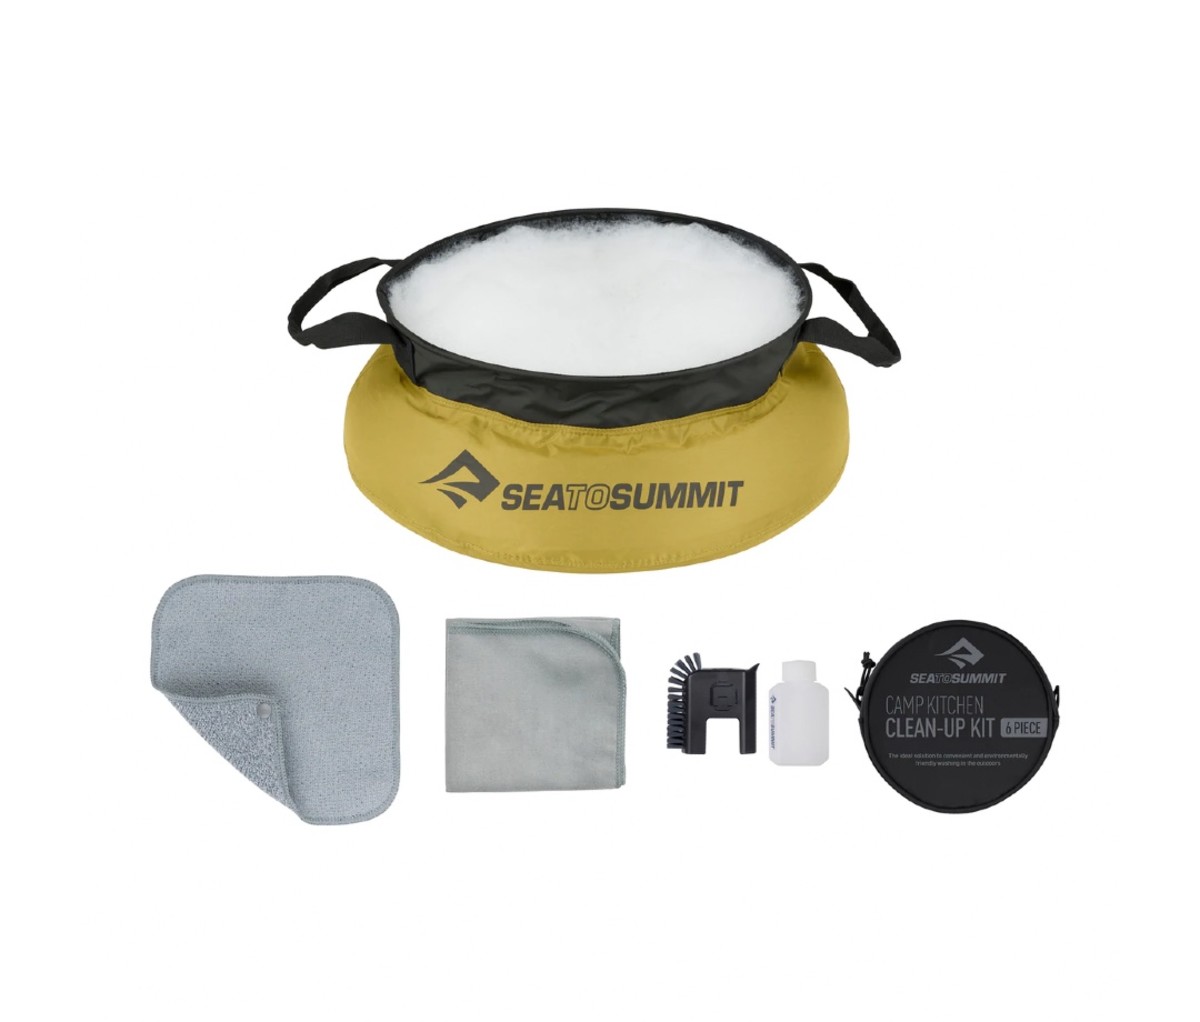 The new Sea to Summit Clean-up Kit makes outdoor dish washing a breeze.